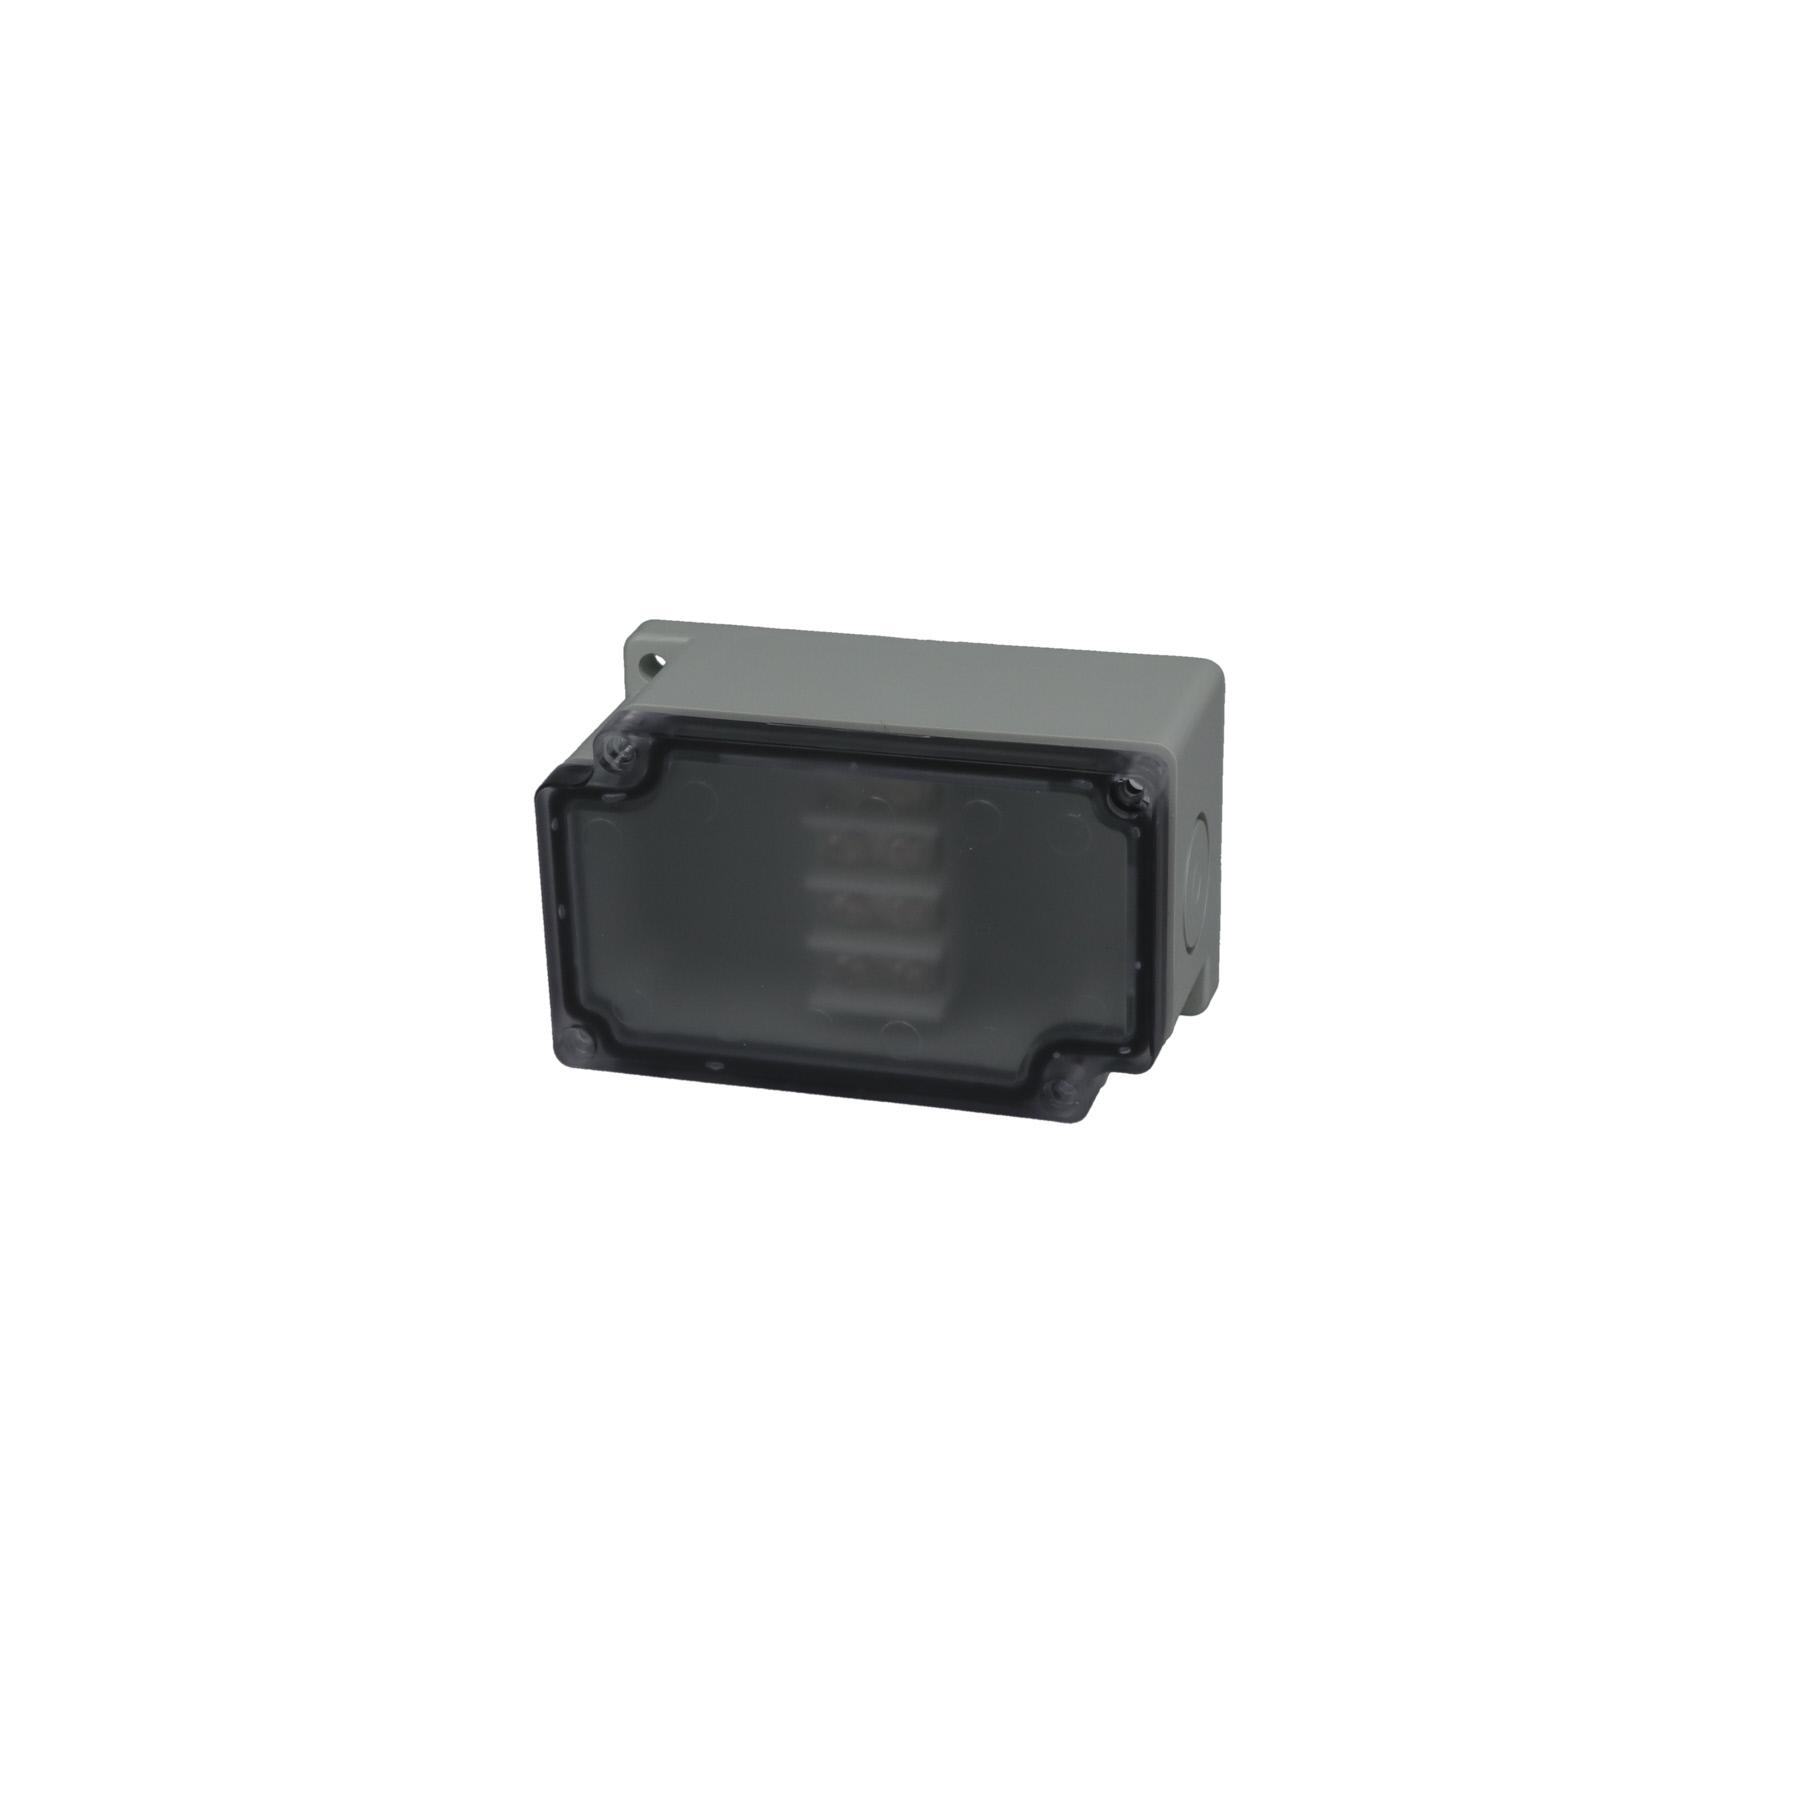 Junction Box 4 Central Terminal Blocks with Clear Cover PTT-10482-C